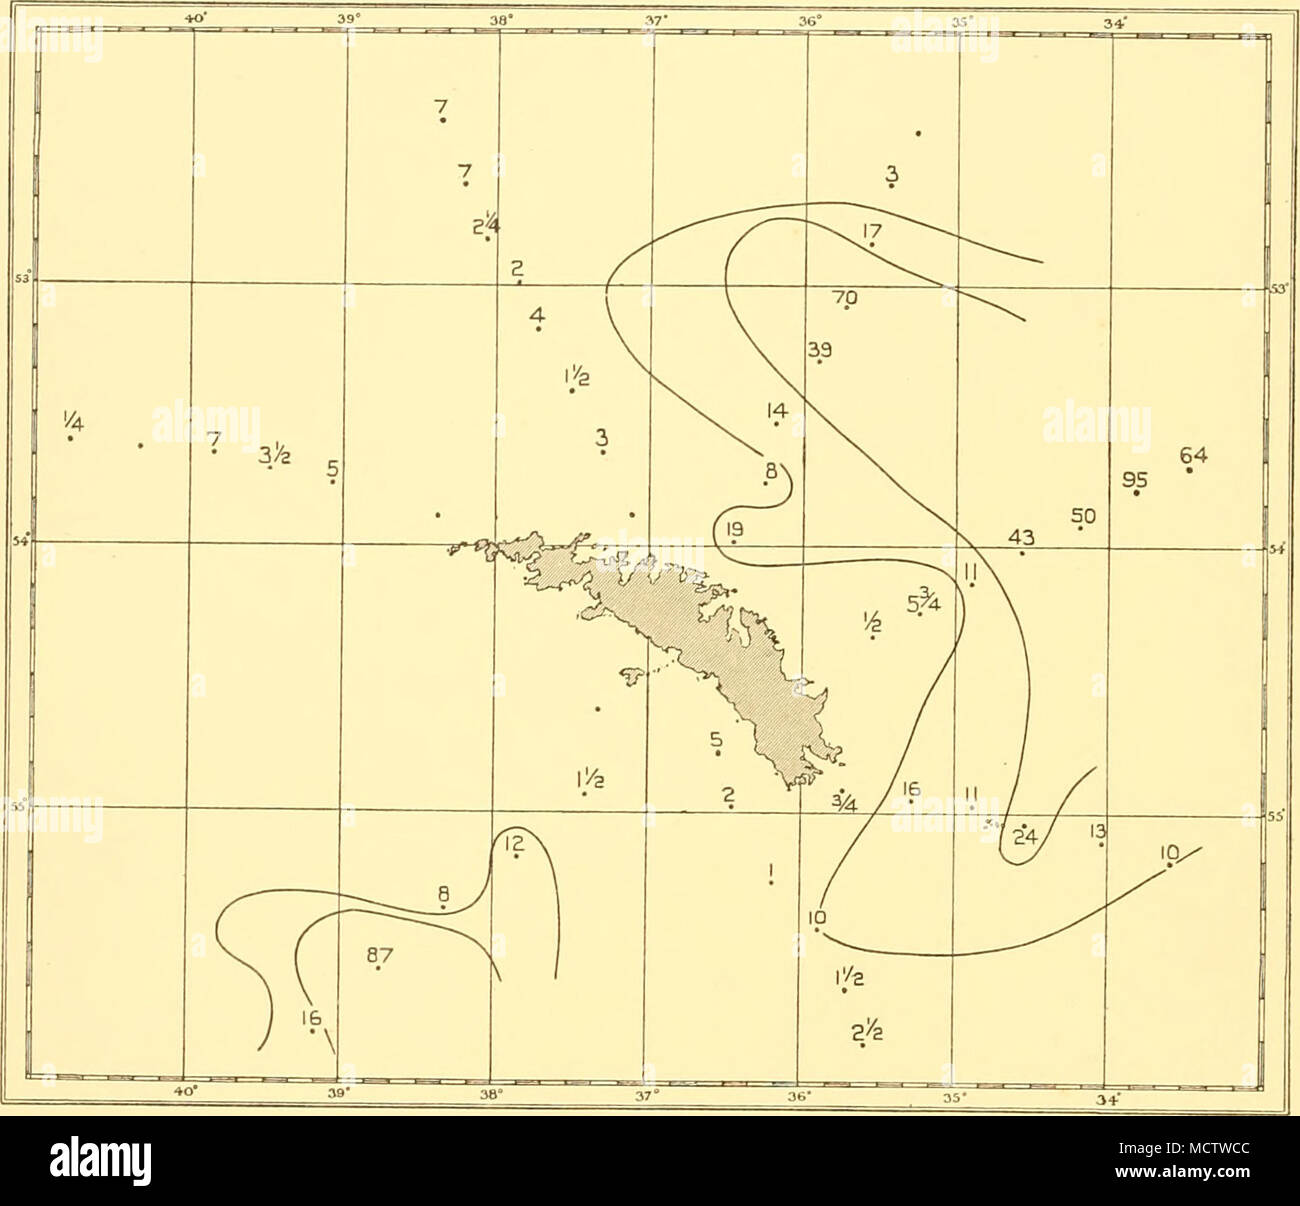 . Fig. 29. The distribution of Rhizosolenia styliformis, South Georgia survey, November 1930. i = one hundred thousand. resources of this surface water. On this survey, it will be remembered, the western Weddell Sea current was apparently at a minimum, and was almost certainly dissi- pated before it reached South Georgia, and all the surface water round South Georgia at that time was comparatively &quot; old &quot; and mixed. More recently Mr John's preliminary investigations of samples collected during 1931-2 confirm the possibility of Thalassio- thrix being transported to the neighbourhood o Stock Photo